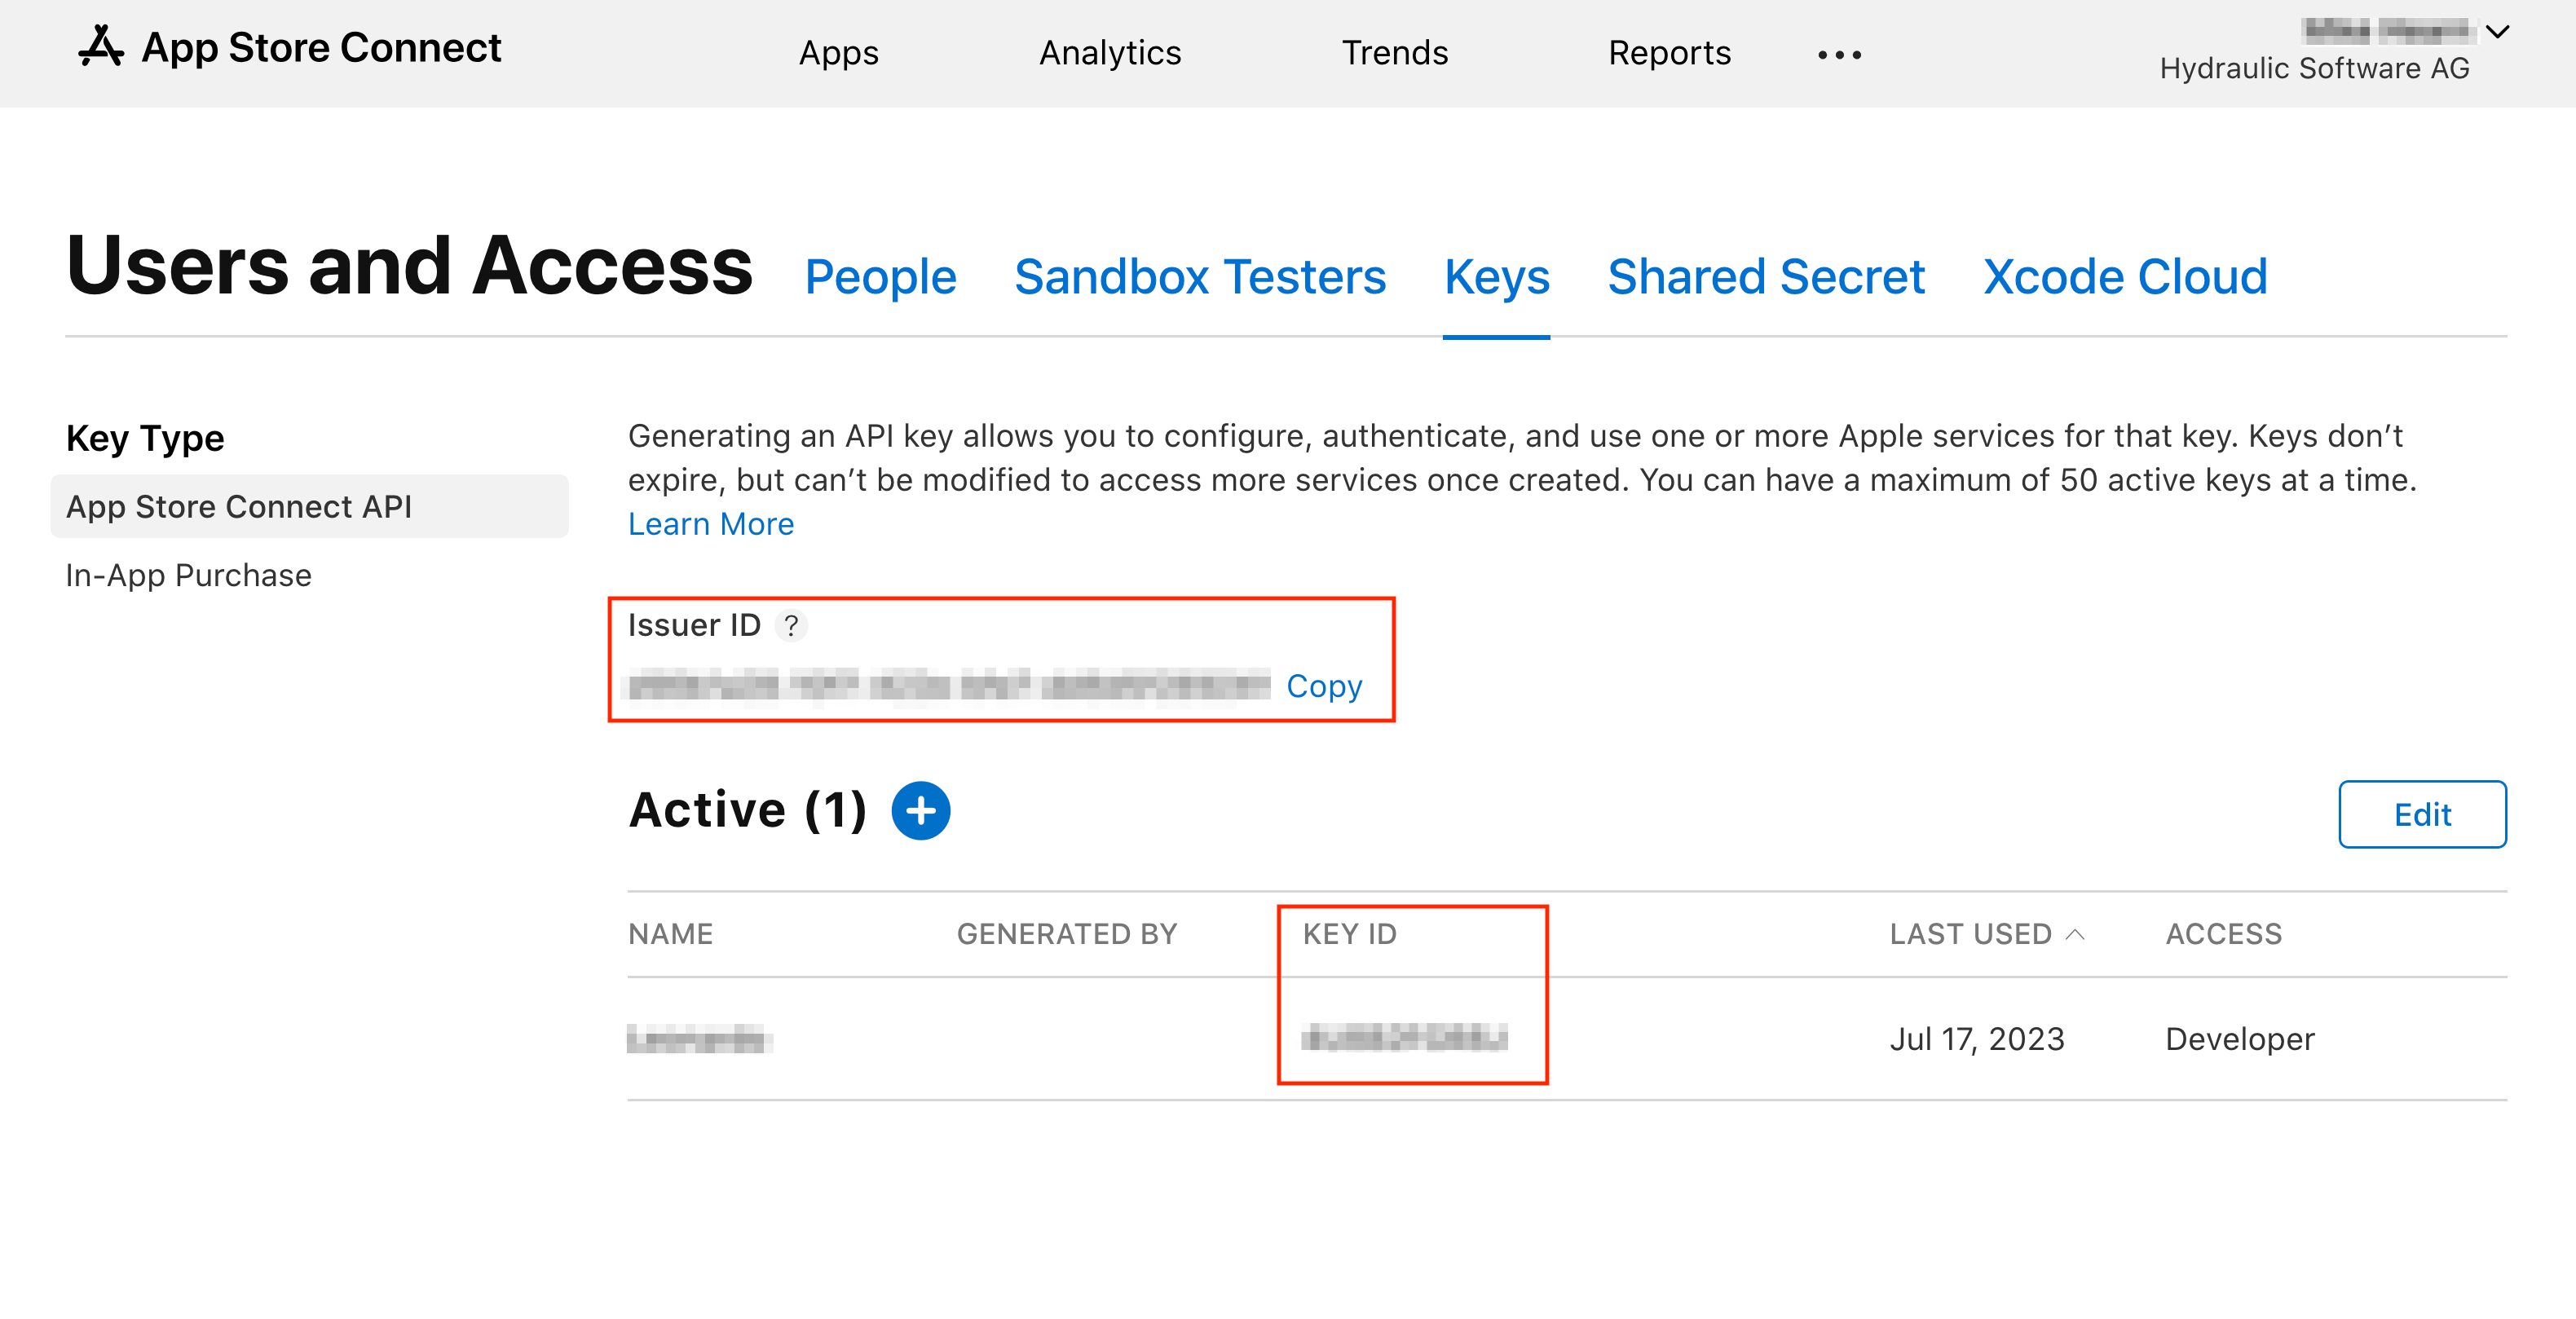 App Store Connect API Key example